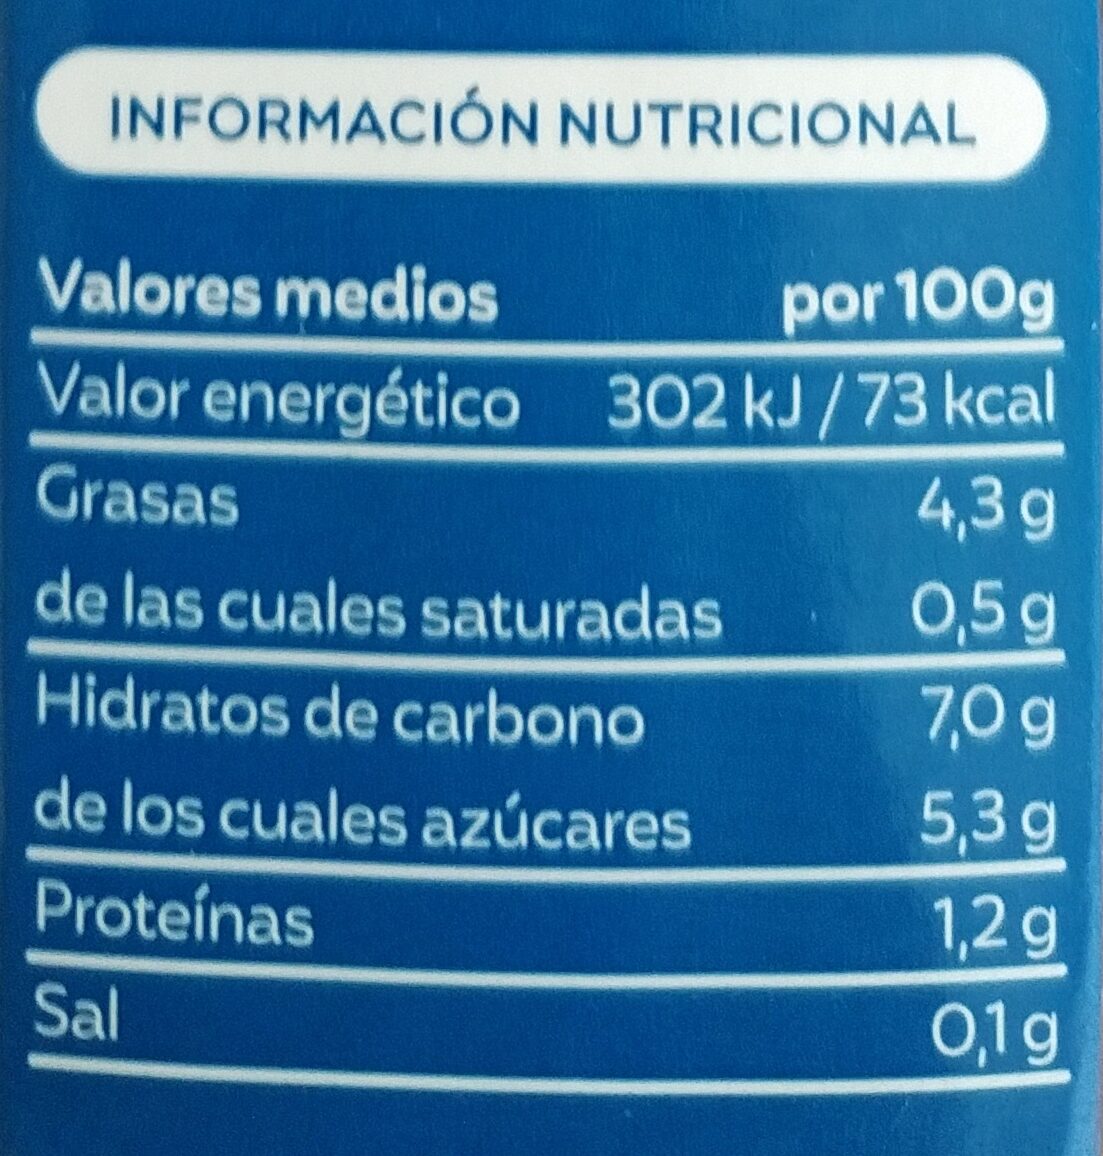 Tomate frito 0,0 - Nutrition facts - es